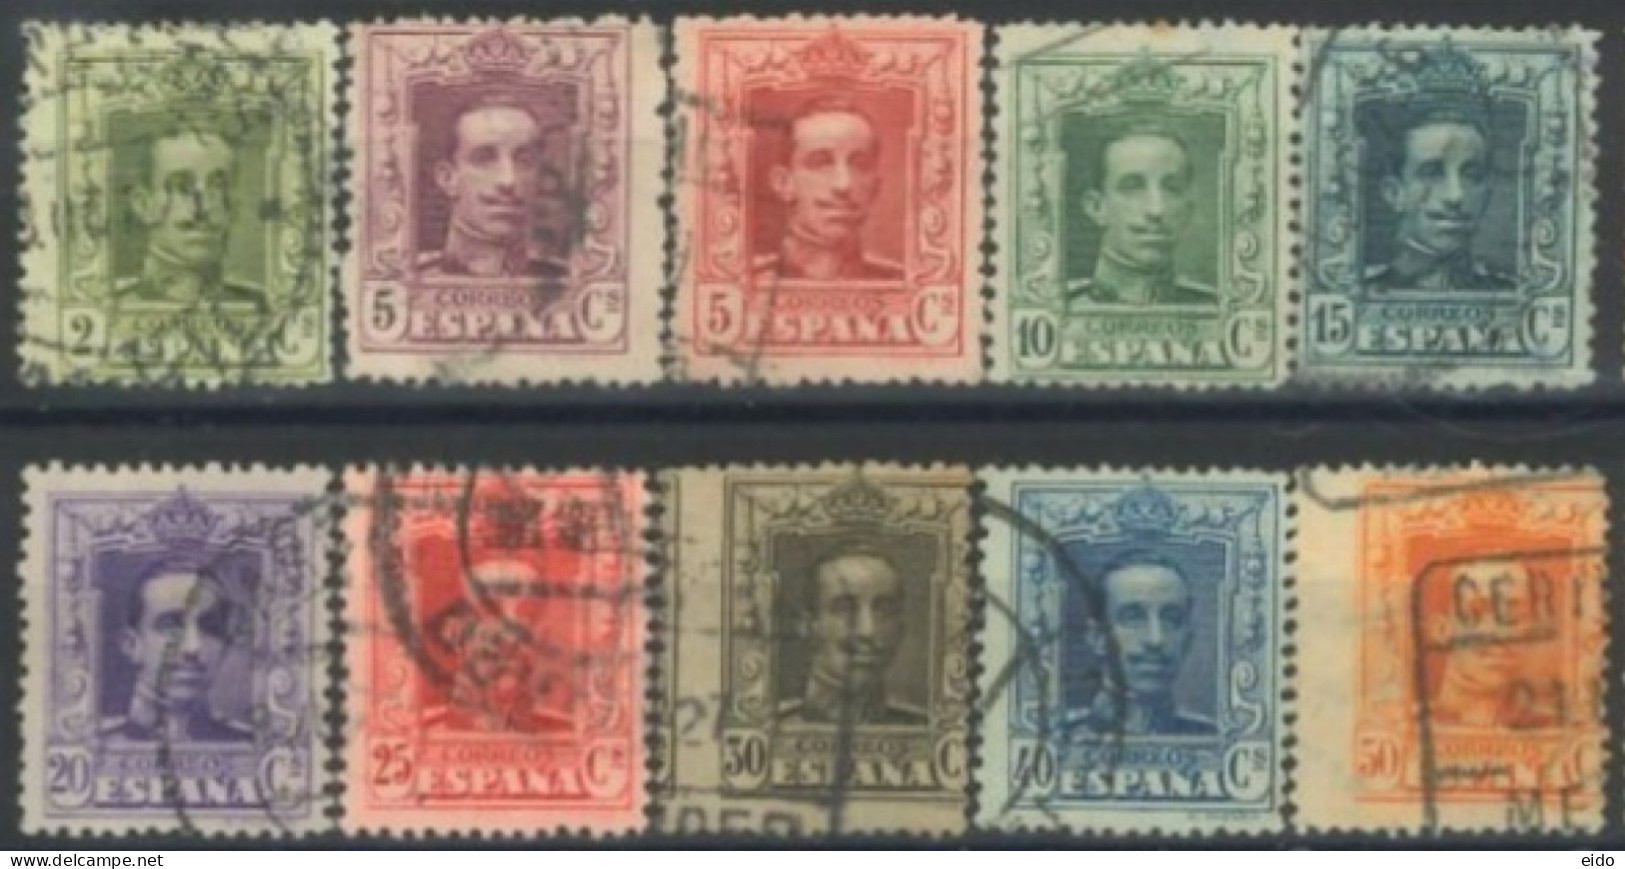 SPAIN, 1922/26, KING ALFONSO XIII STAMPS SET OF 10, # 331/33, &335/41, USED. - Usati